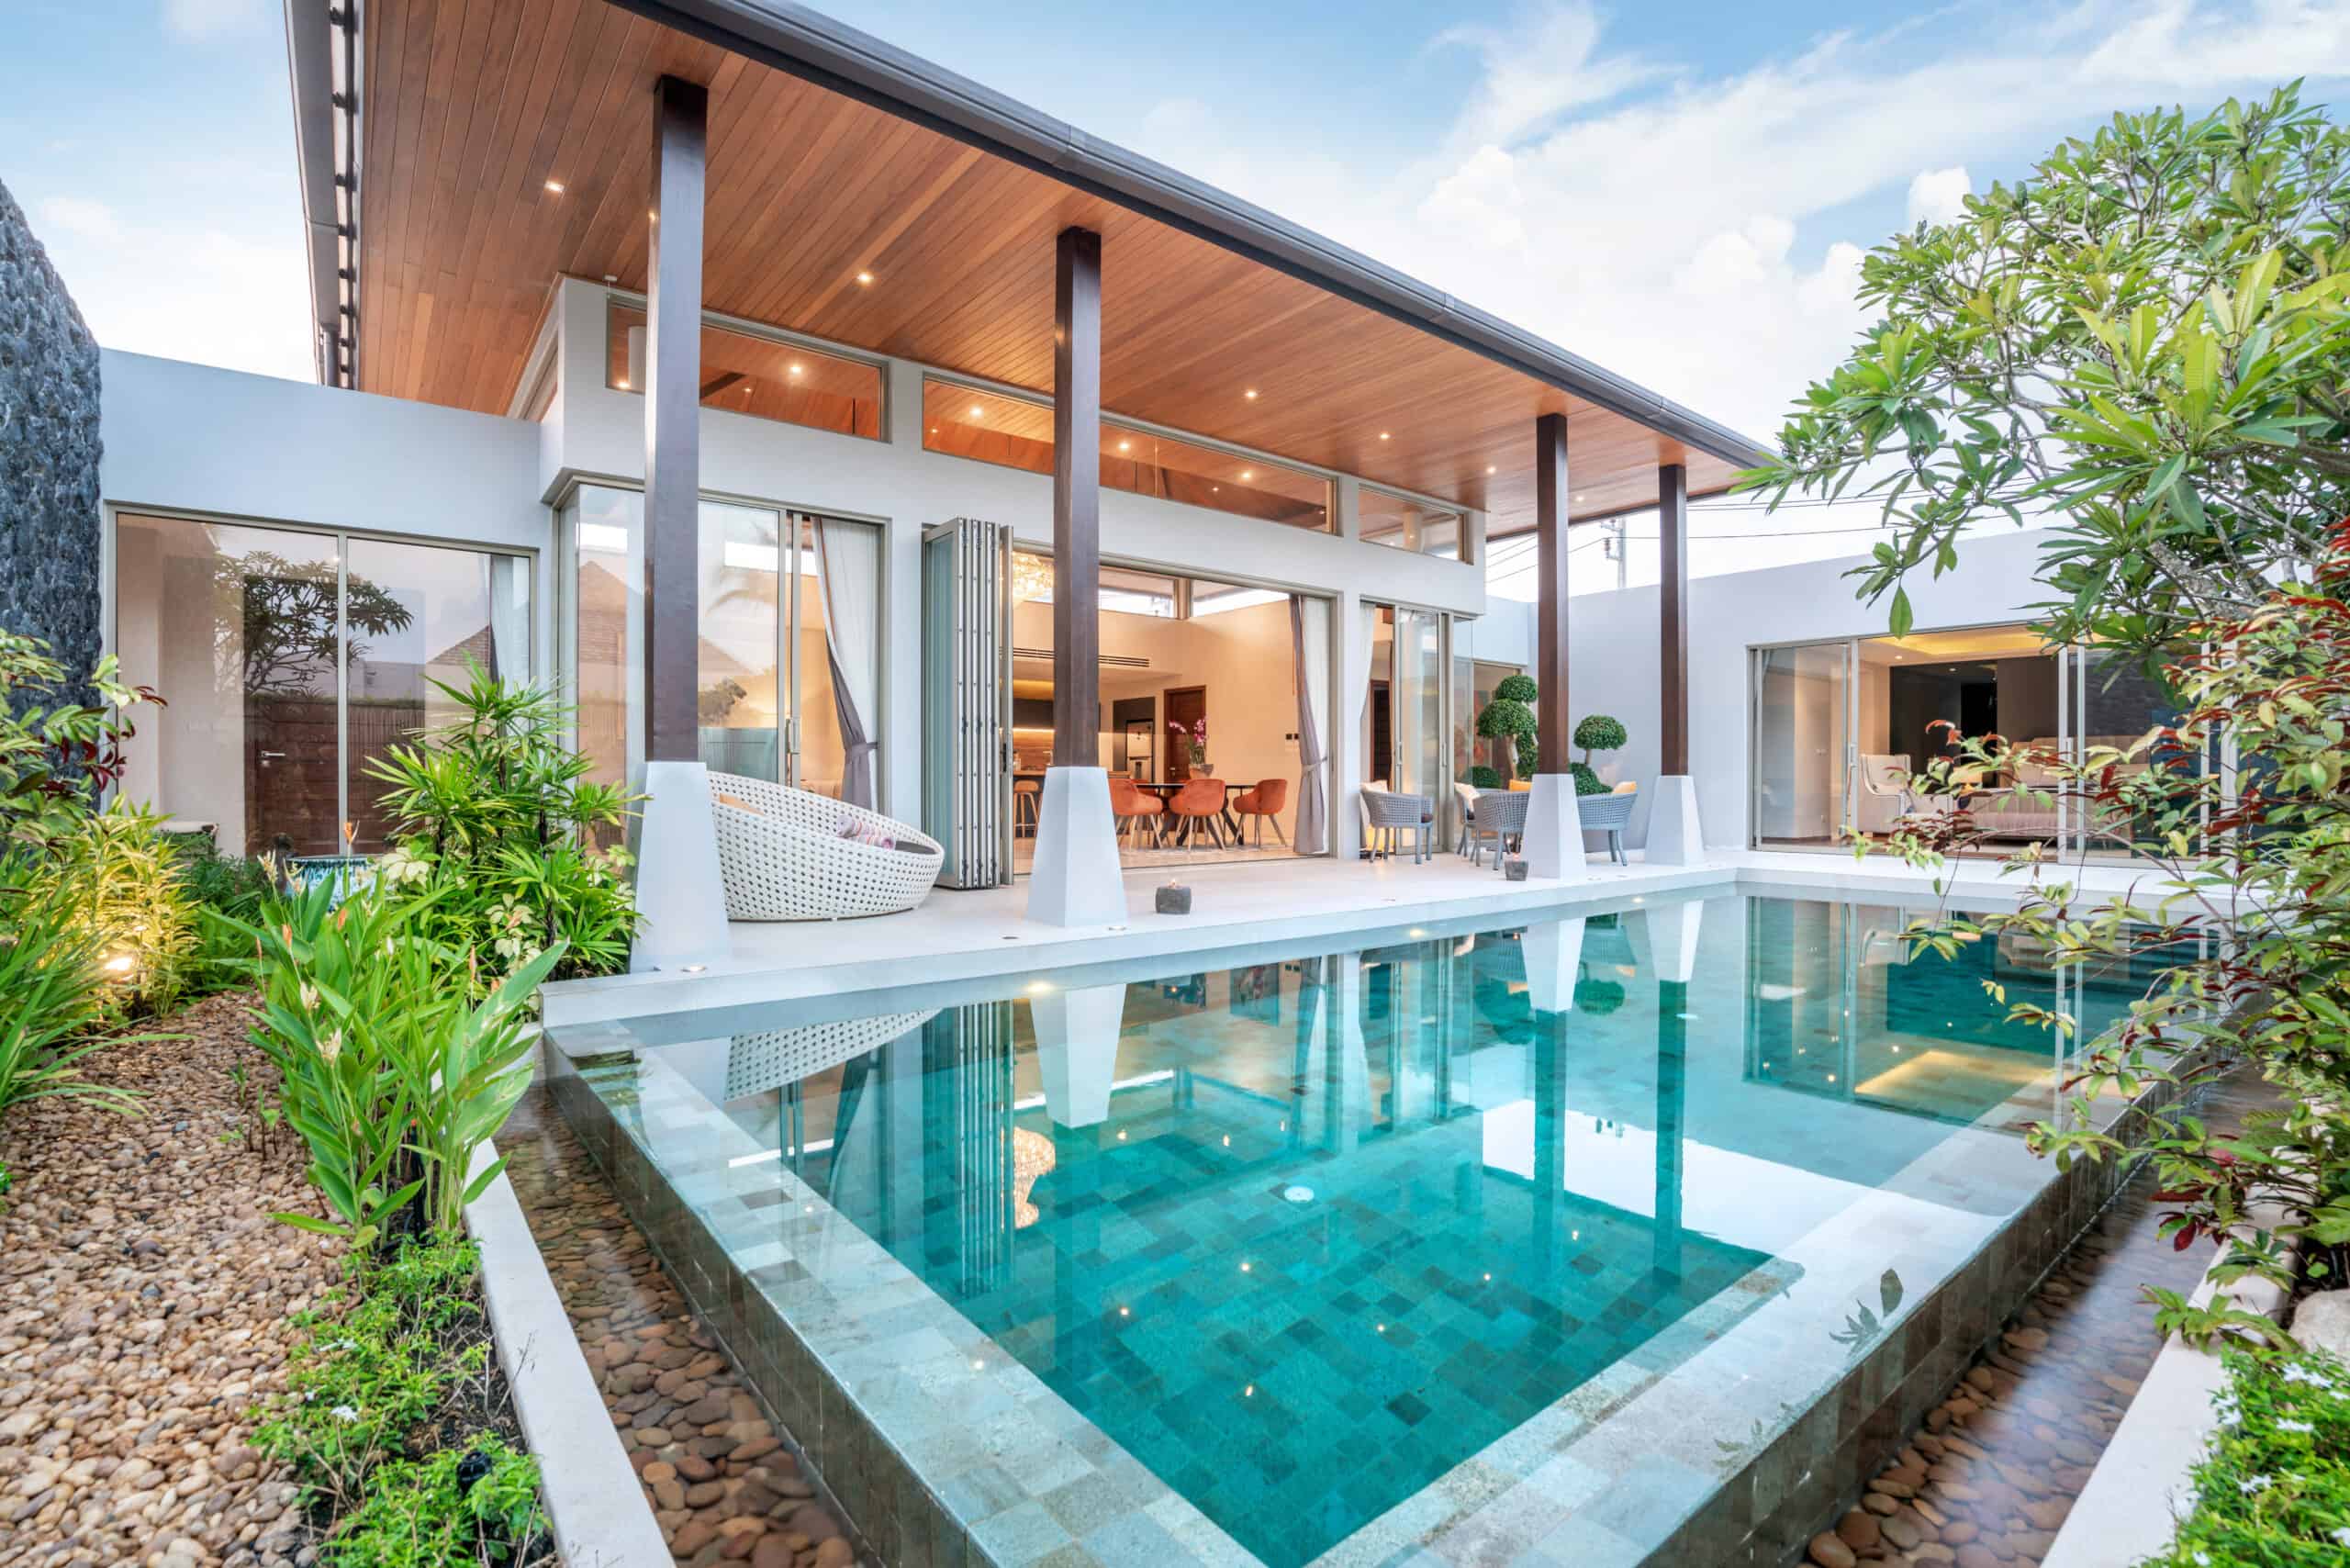 the backyard of a modern home with an infinity pool.